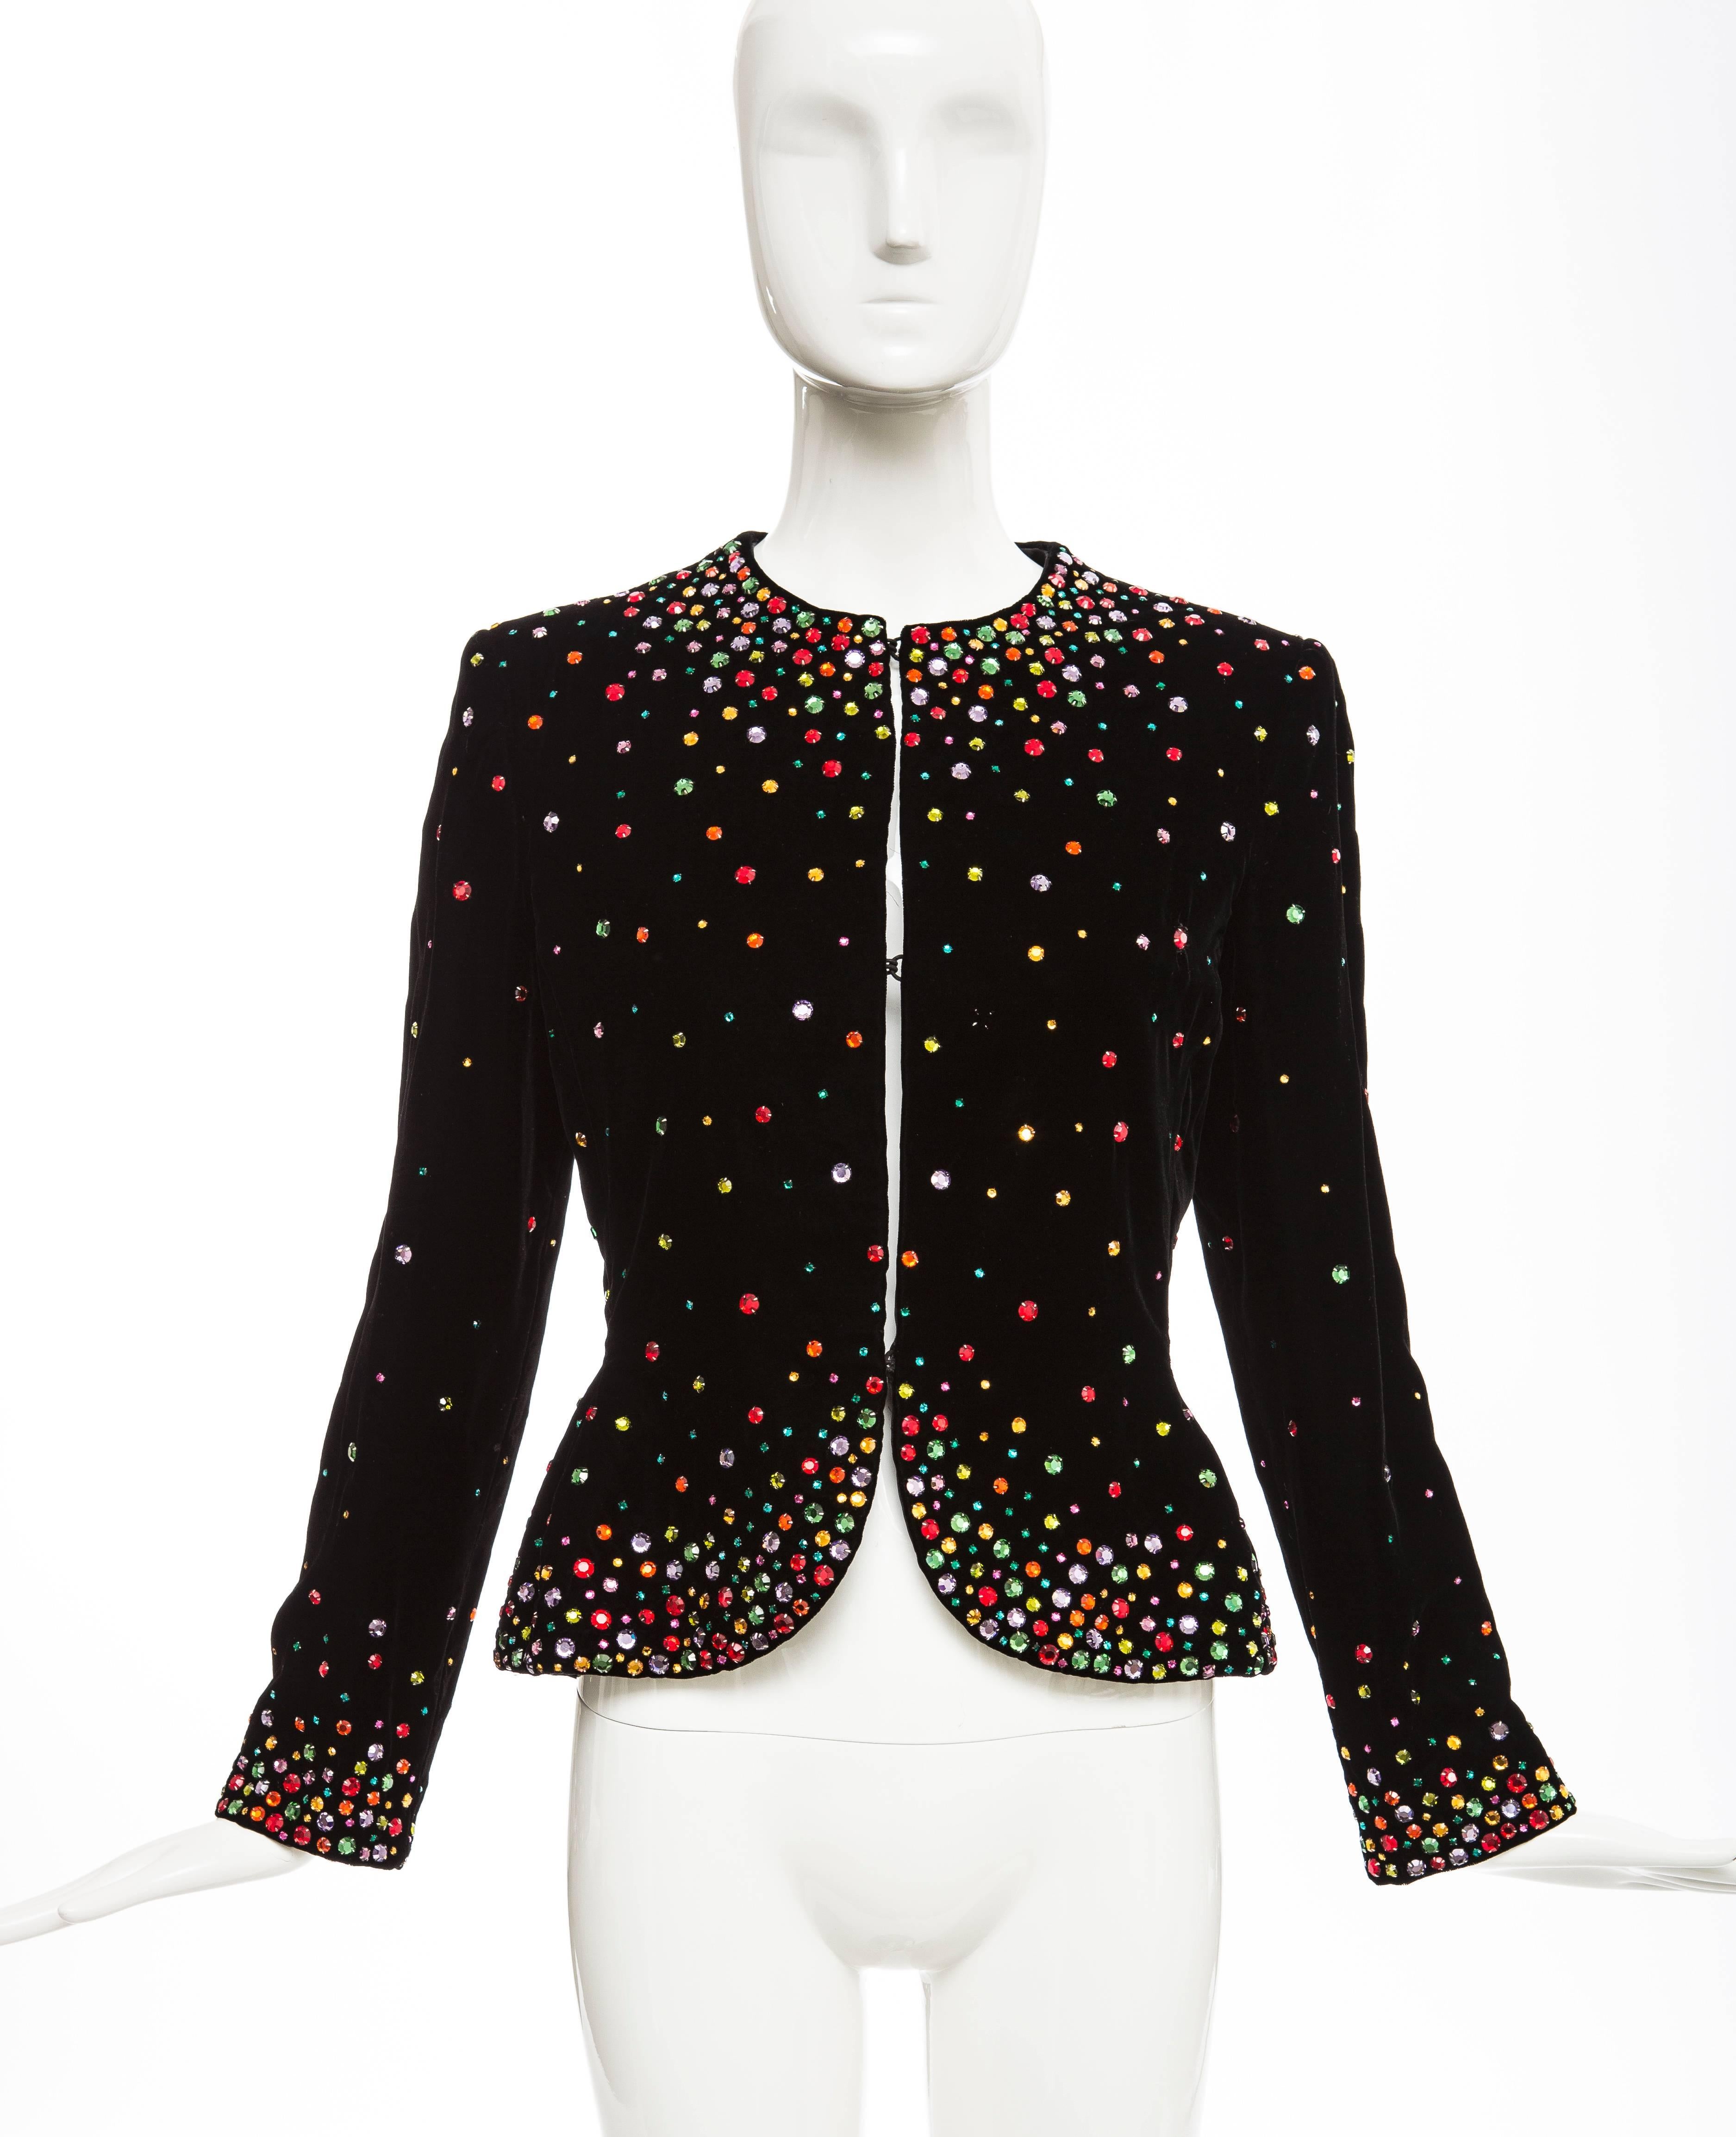 Bill Blass, Autumn-Winter 1979, black silk velvet jacket encrusted with prong set crystals, jewel neckline, hook-and-eye front closure and fully lined in silk.

US. 8

Bust 36, Waist 30, Hips 36, Length 22